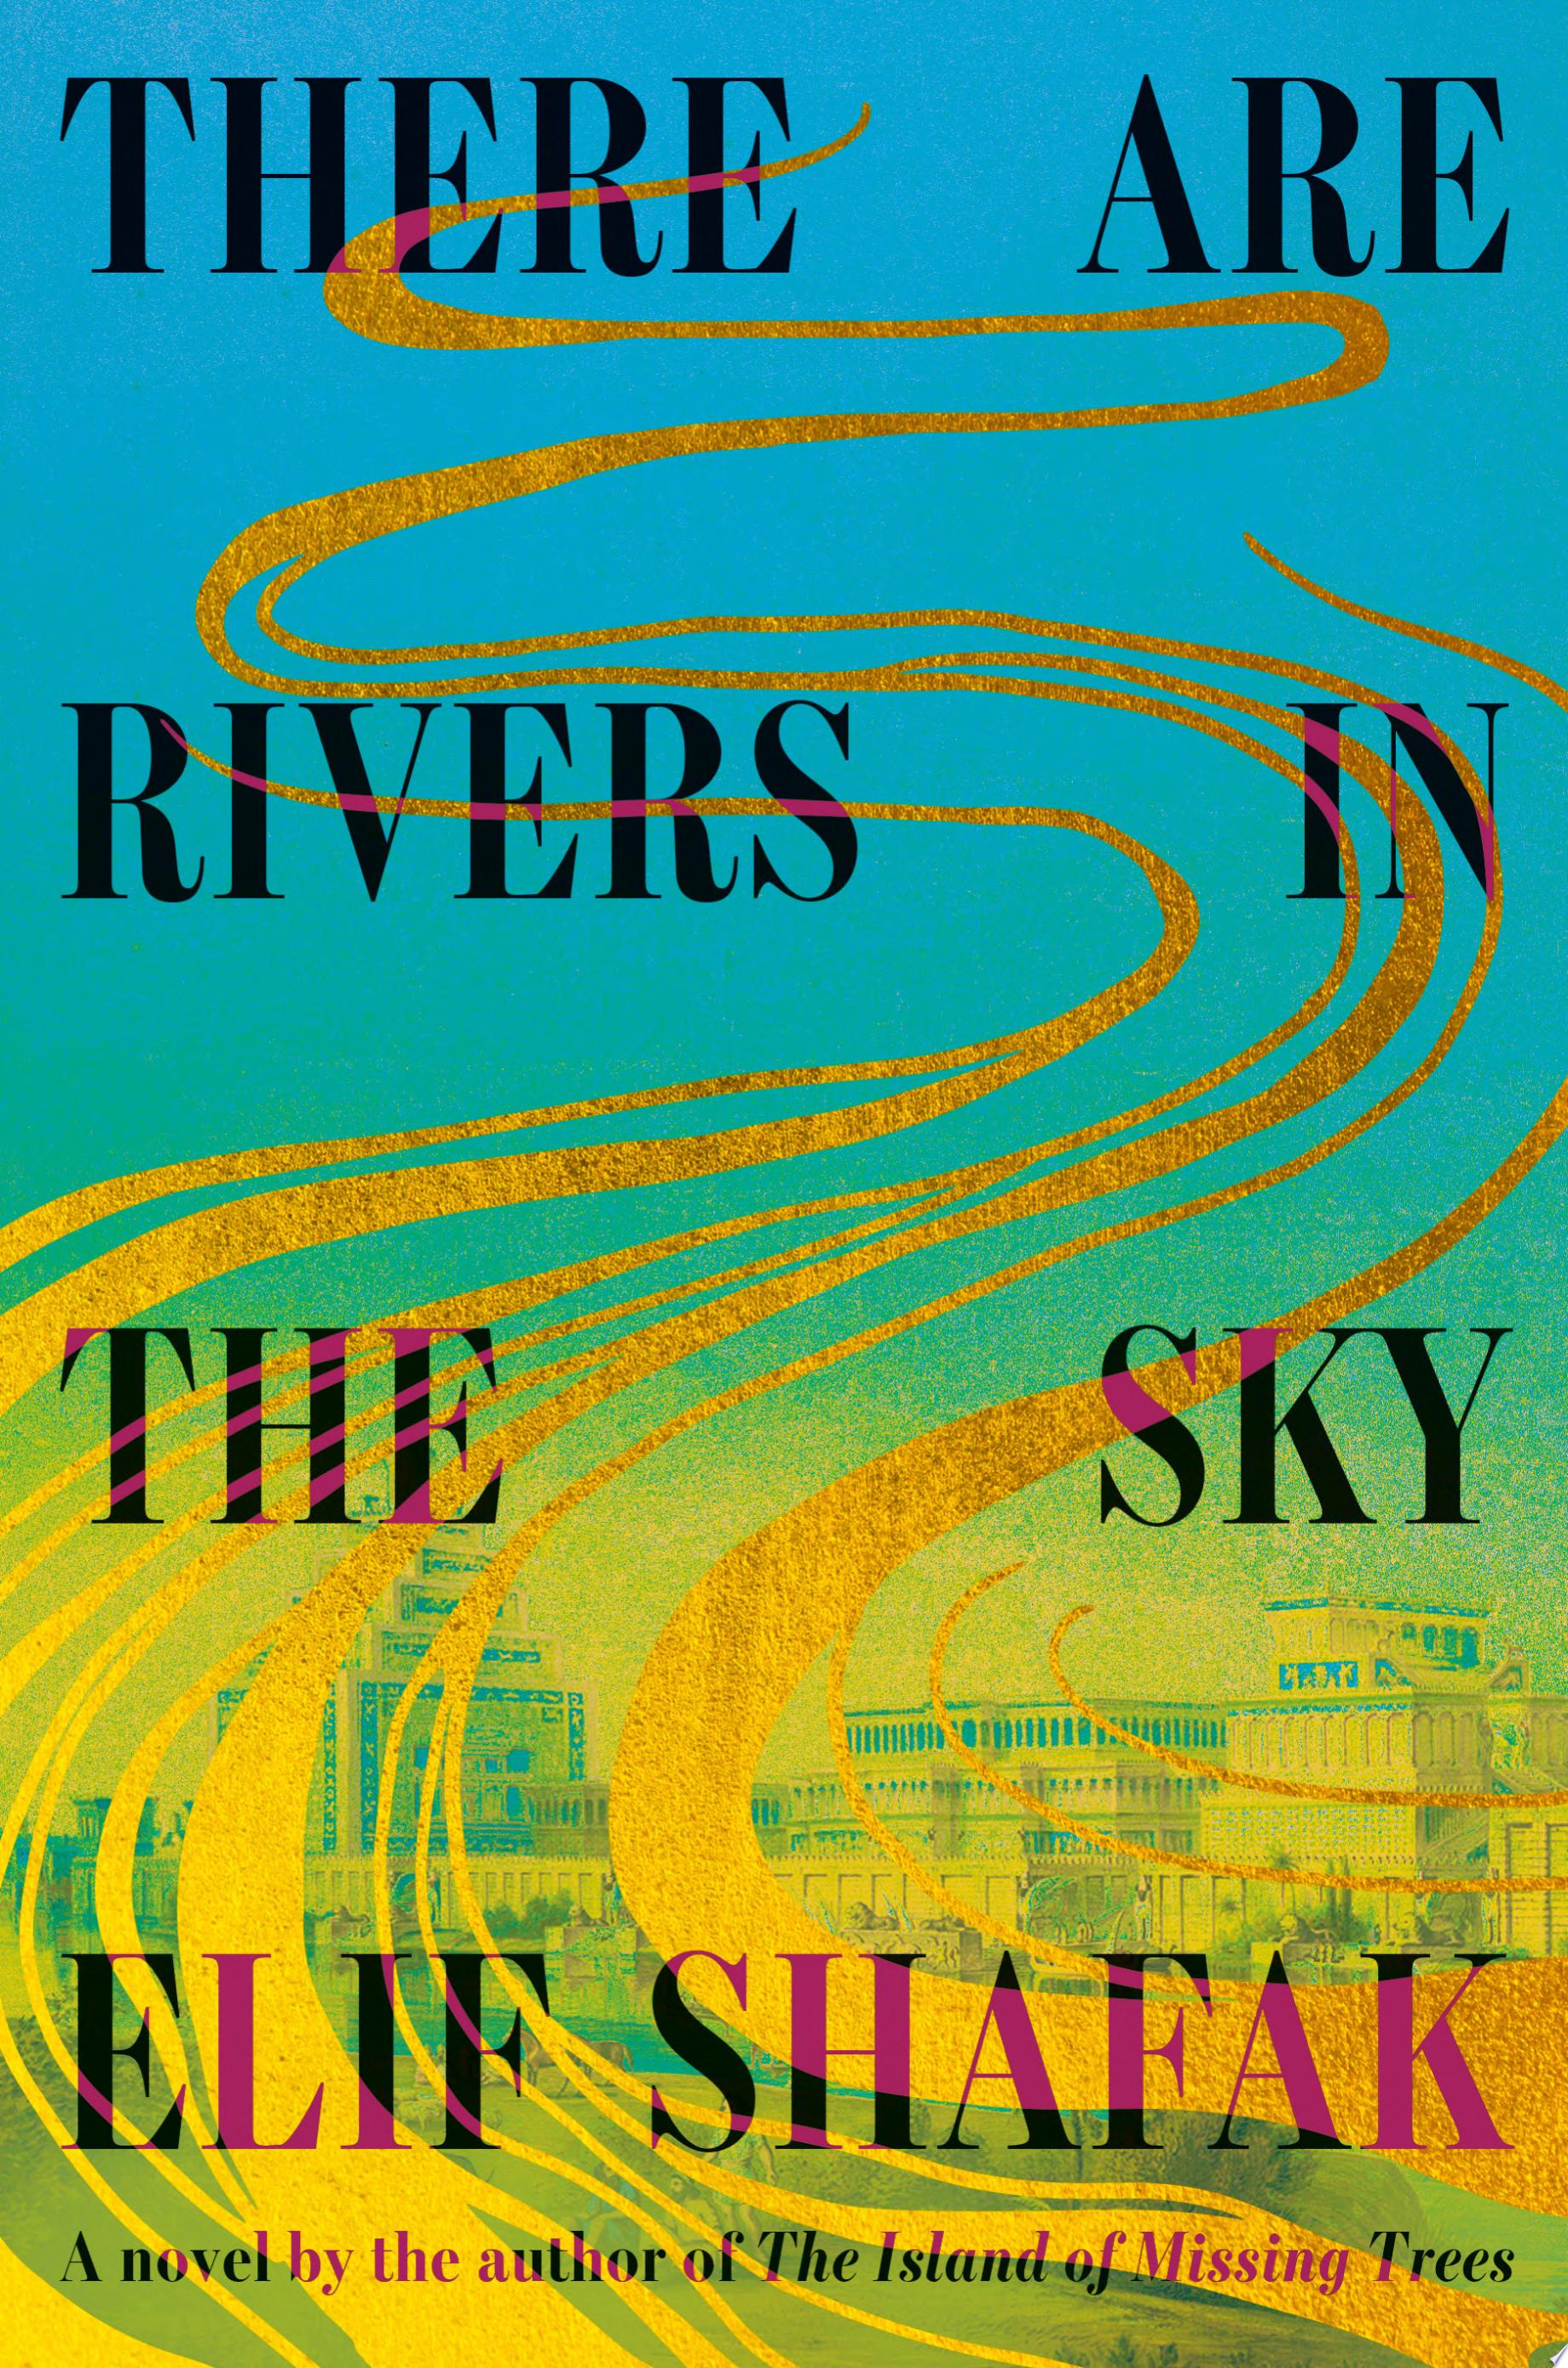 Image for "There Are Rivers in the Sky"